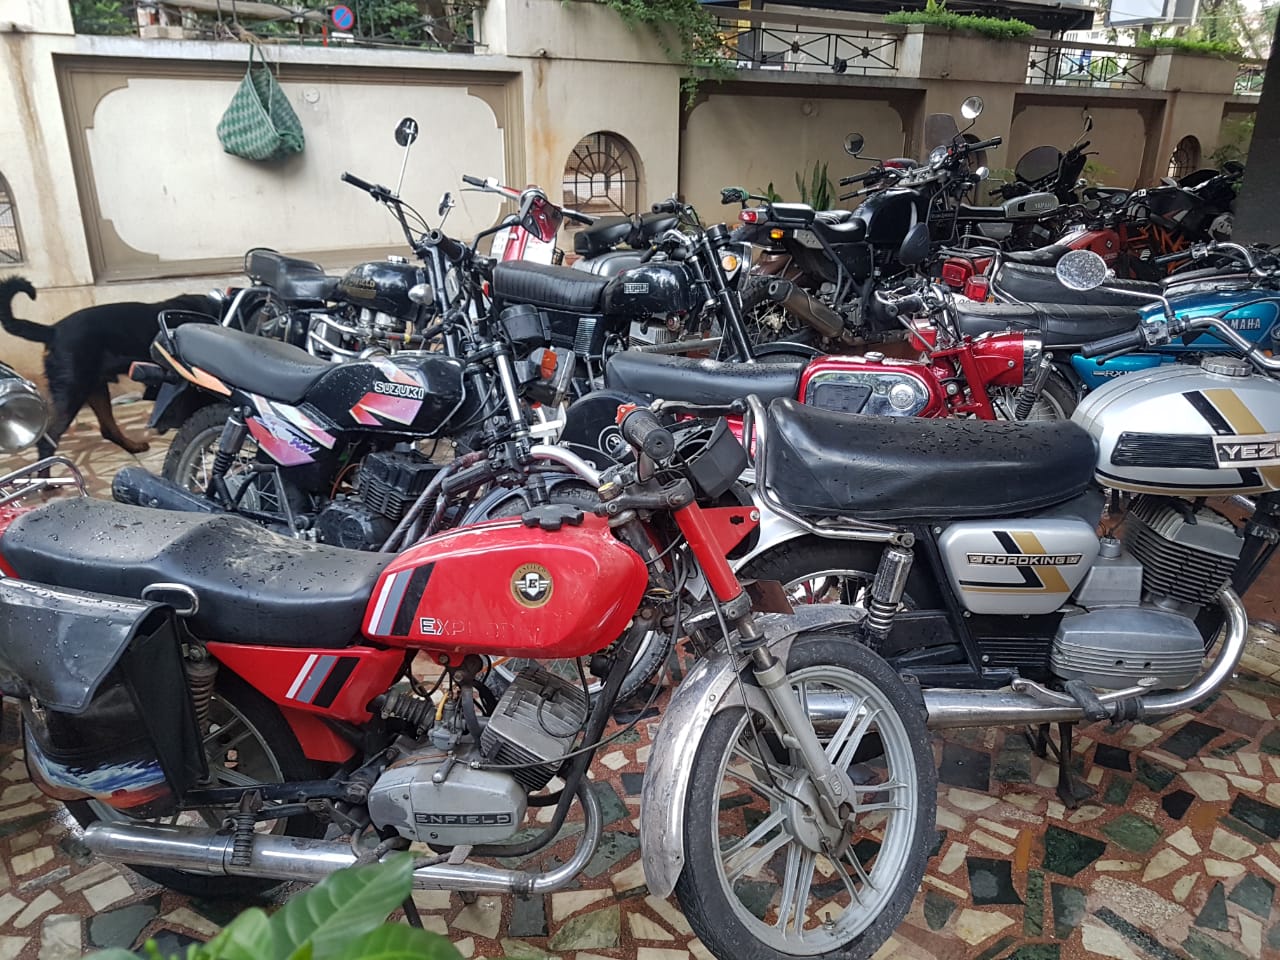 Iab Reader Shares His Experience With A Restored Rajdoot Gts Bobby